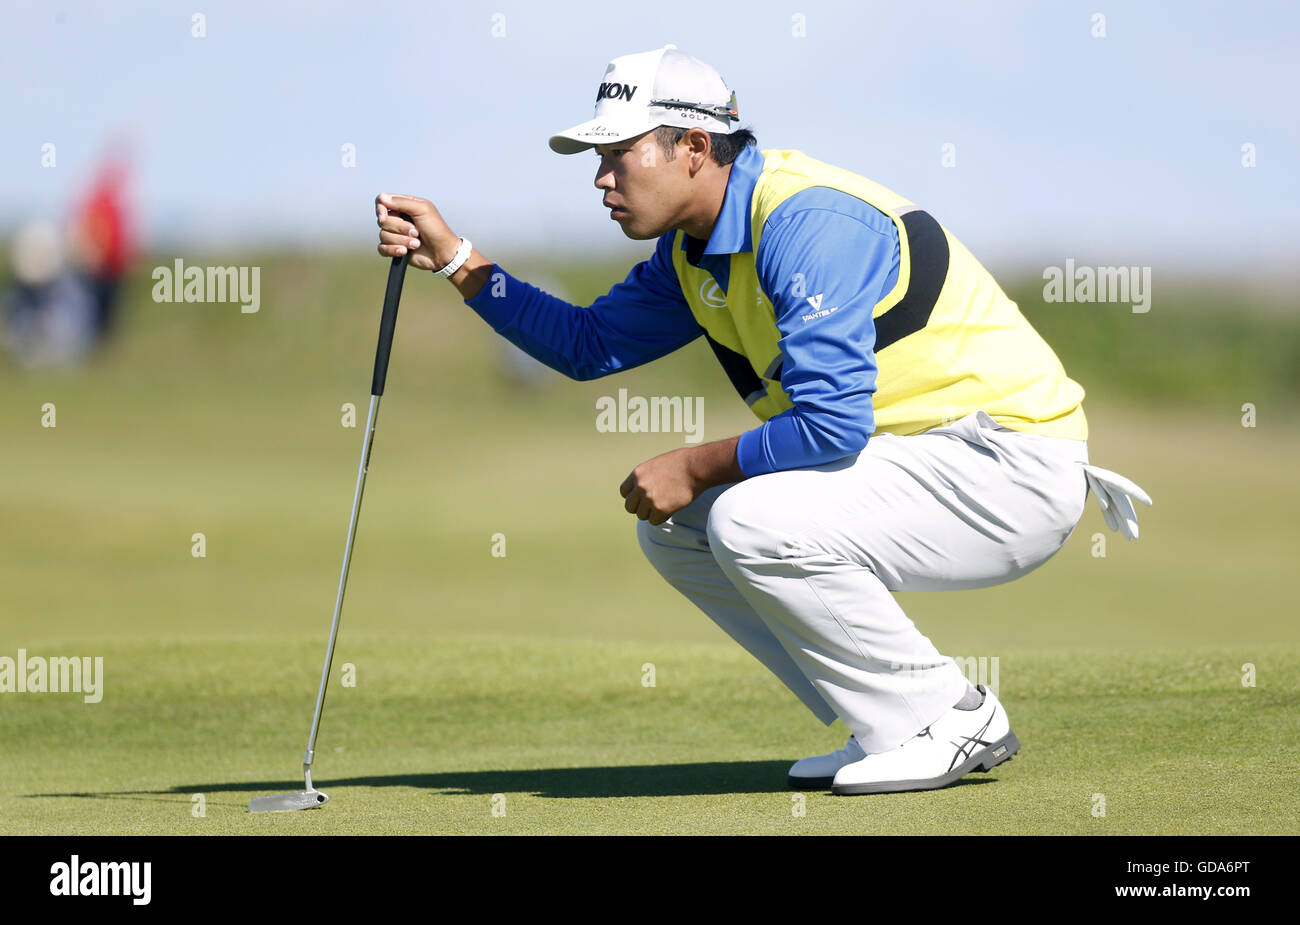 Japan's Hideki Matsuyama lines up a putt during day one of The Open Championship 2016 at Royal Troon Golf Club, South Ayrshire. PRESS ASSOCIATION Photo. Picture date: Thursday July 14, 2016. See PA story GOLF Open. Photo credit should read: Danny Lawson/PA Wire. RESTRICTIONS: Editorial use only. No commercial use. No onward sale. Still image use only. The Open Championship logo and clear link to The Open website (TheOpen.com) to be included on website publishing. Call +44 (0)1158 447447 for further information. Stock Photo